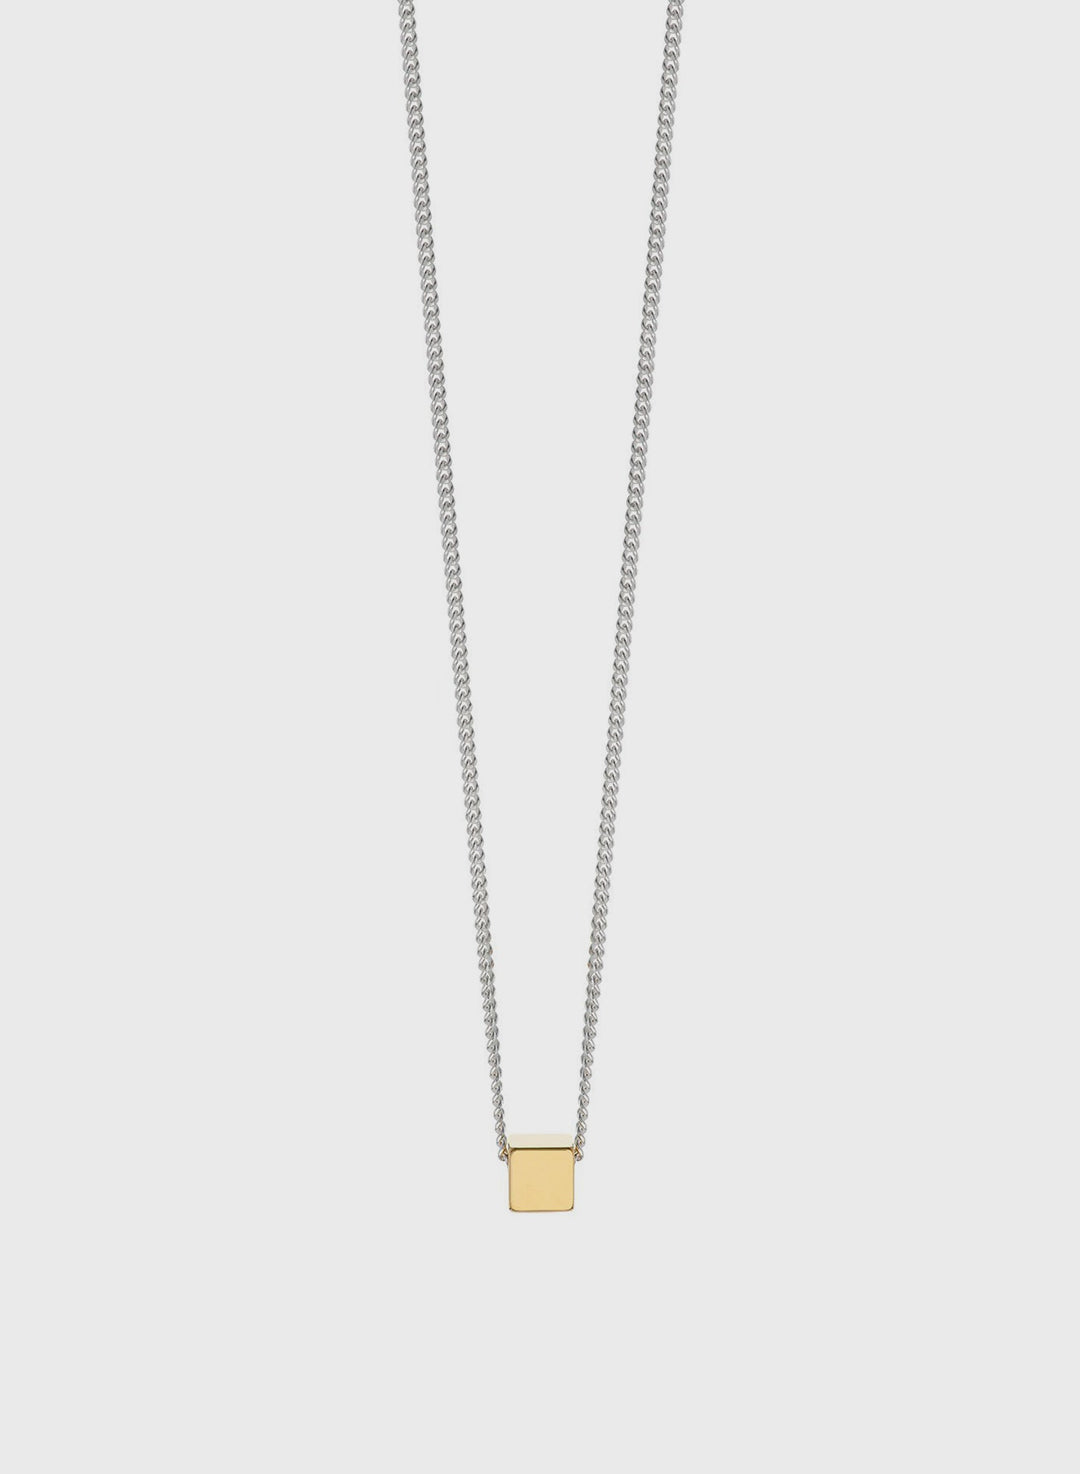 Box Pendant Necklace Gold Plated